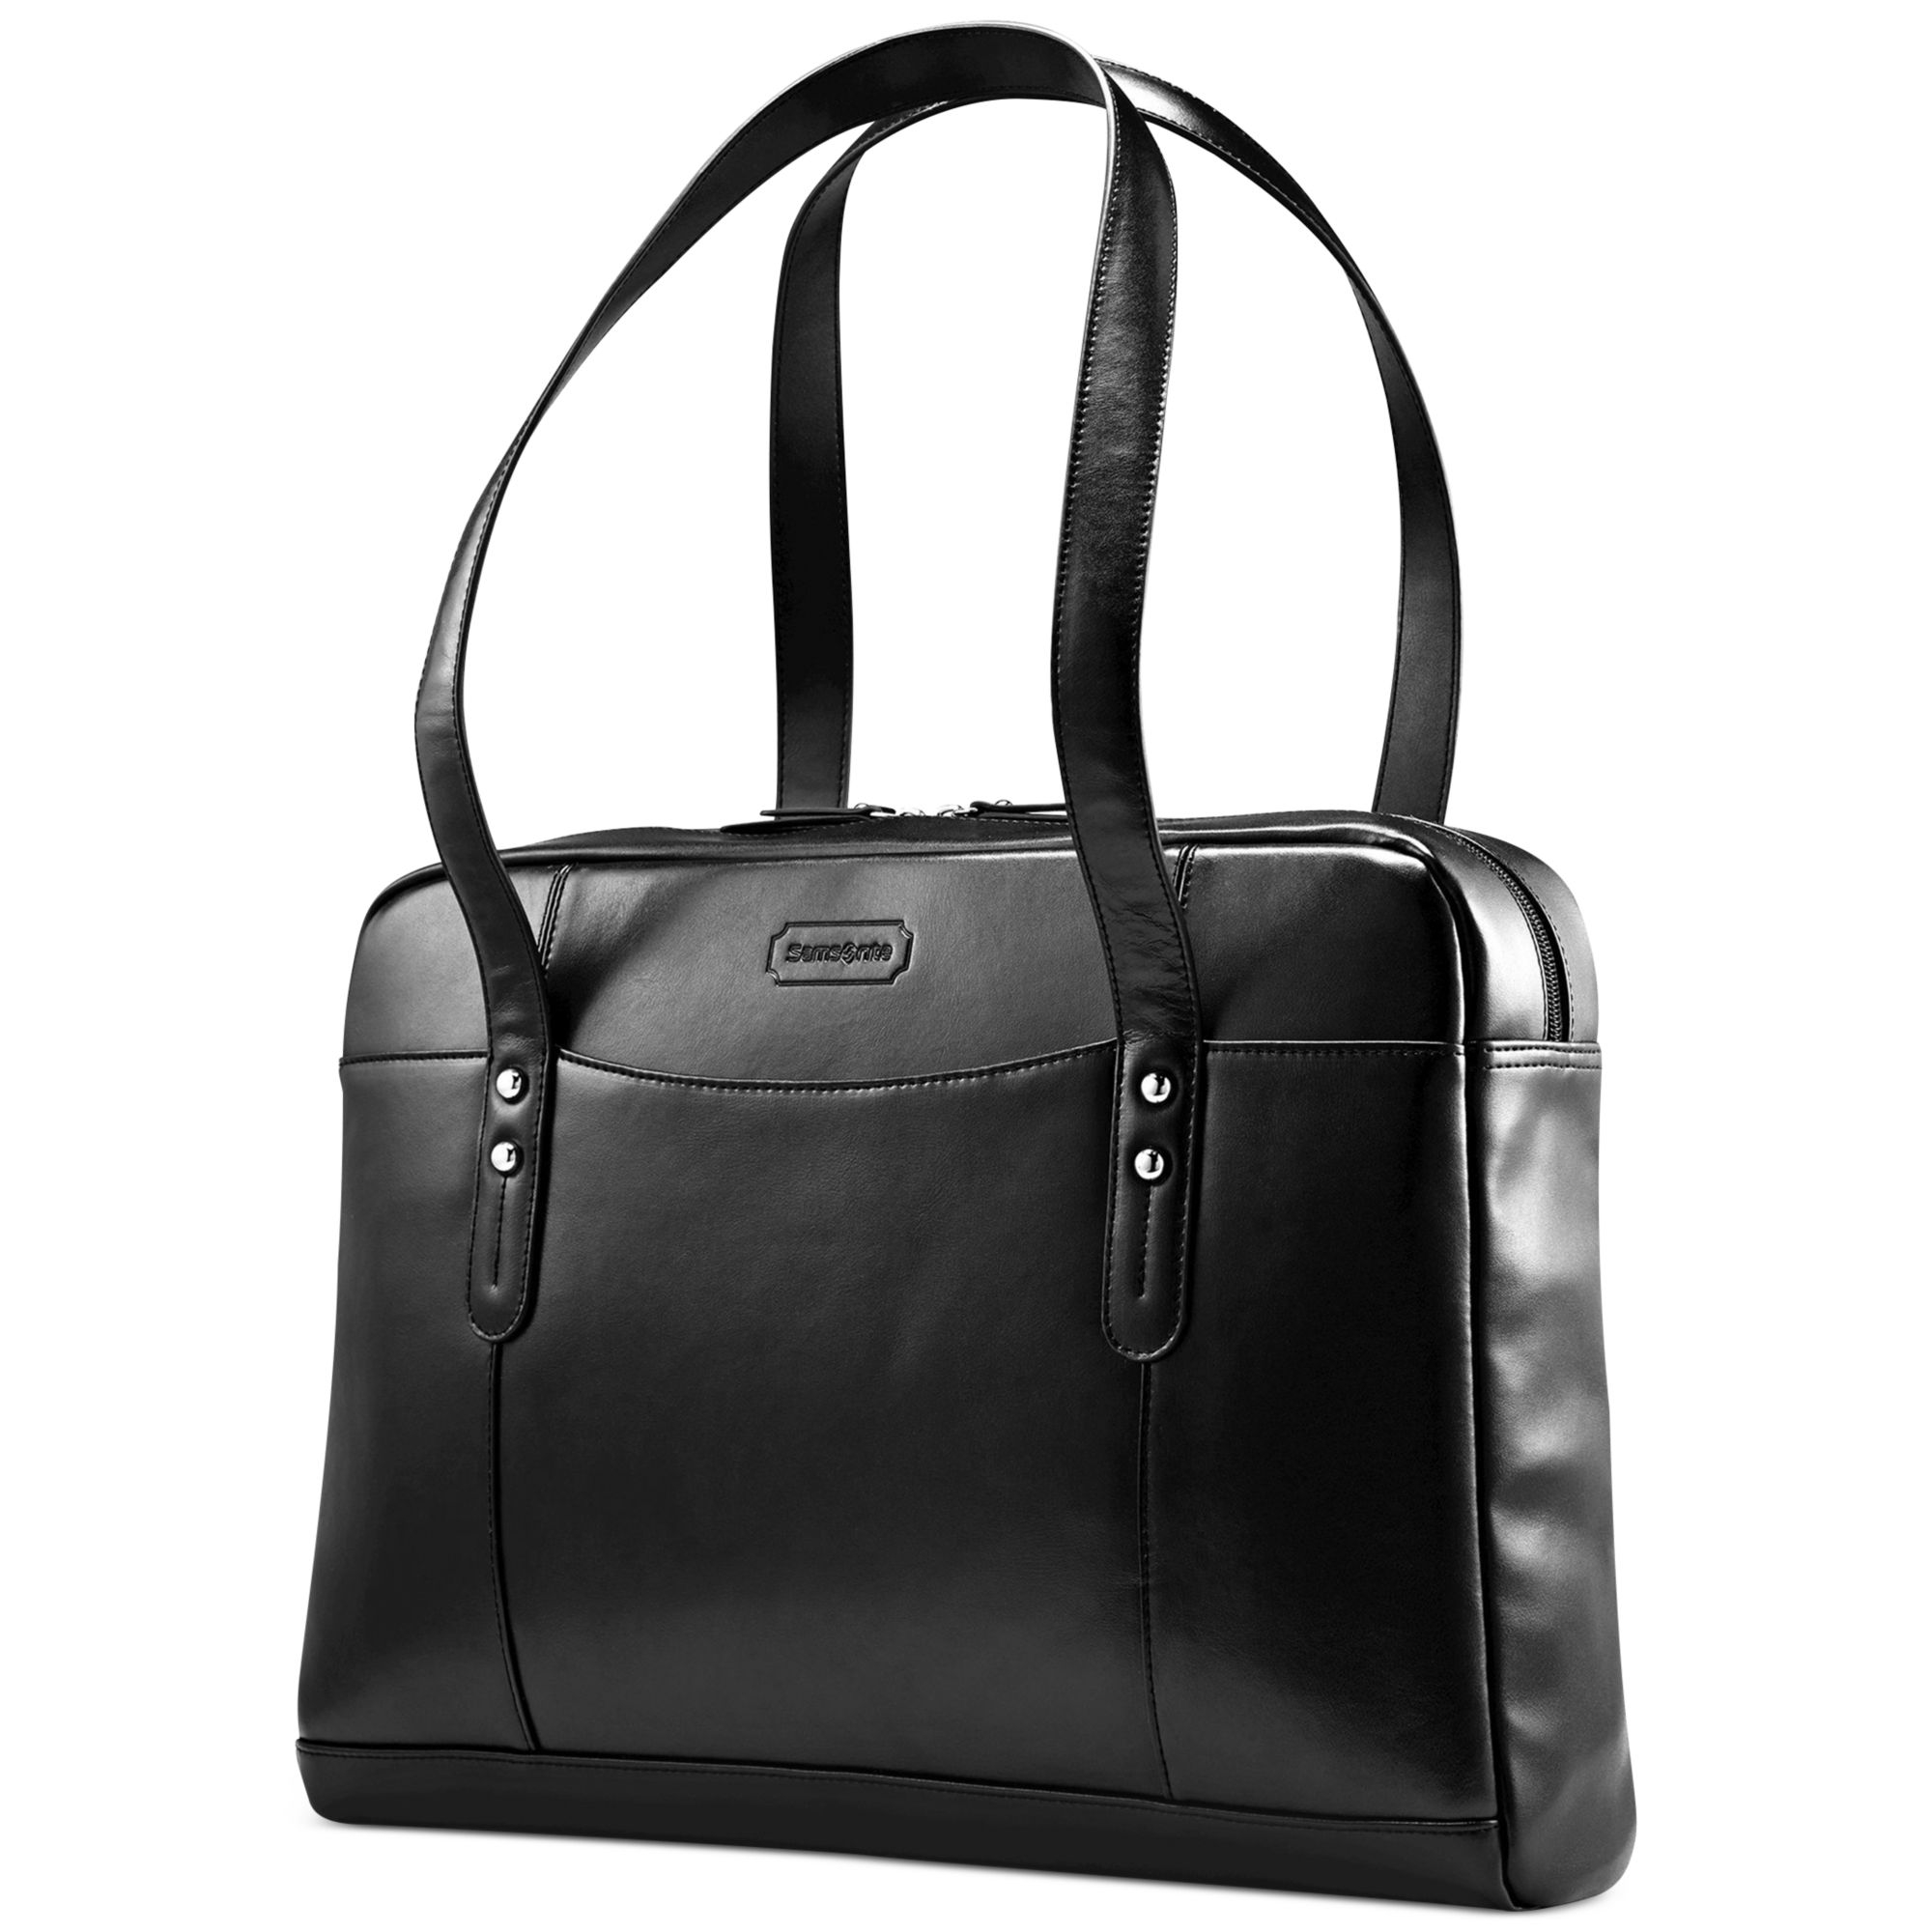 Lyst - Samsonite Leather Womens Leather Slim Laptop Briefcase in Black for Men